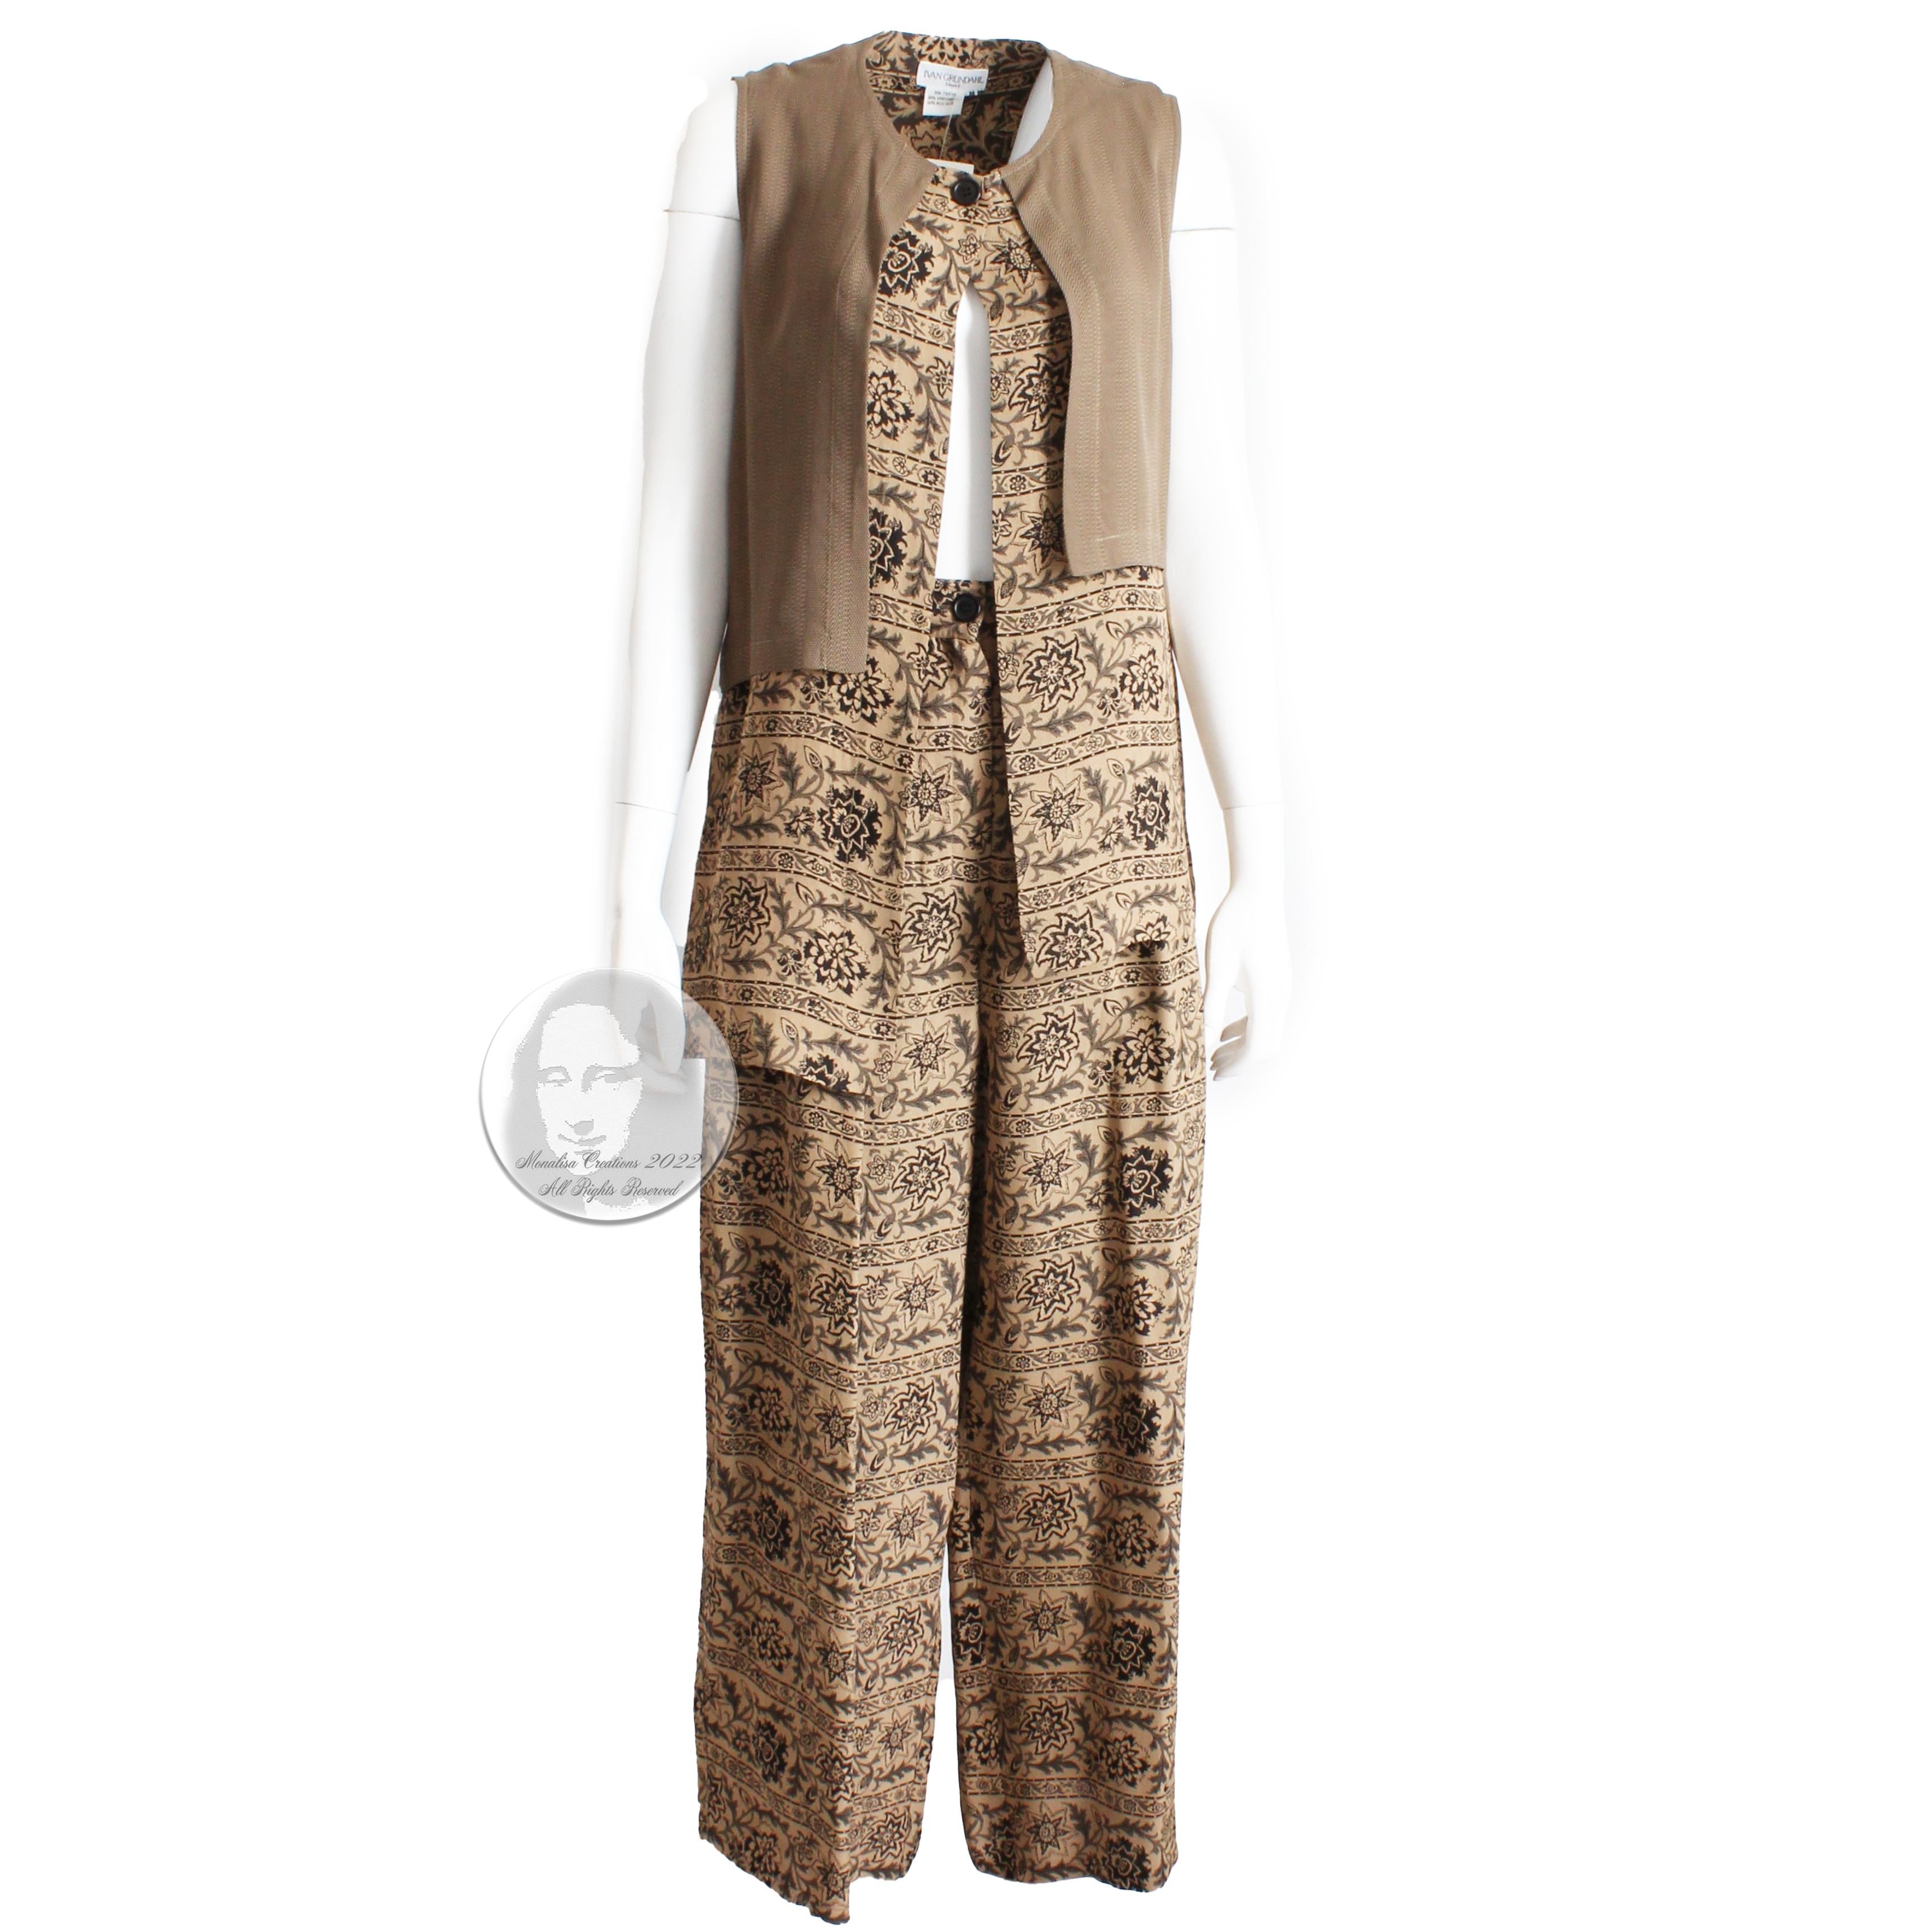 Ivan Grundahl Long Vest & Pants Set Lagenlook Linea S Jag Floral Tweed M. NWT and unworn. This 2pc ensemble was made by Ivan Grundahl for his Linea S sportswear collection and includes a single-button layered vest with asymmetric hem and matching